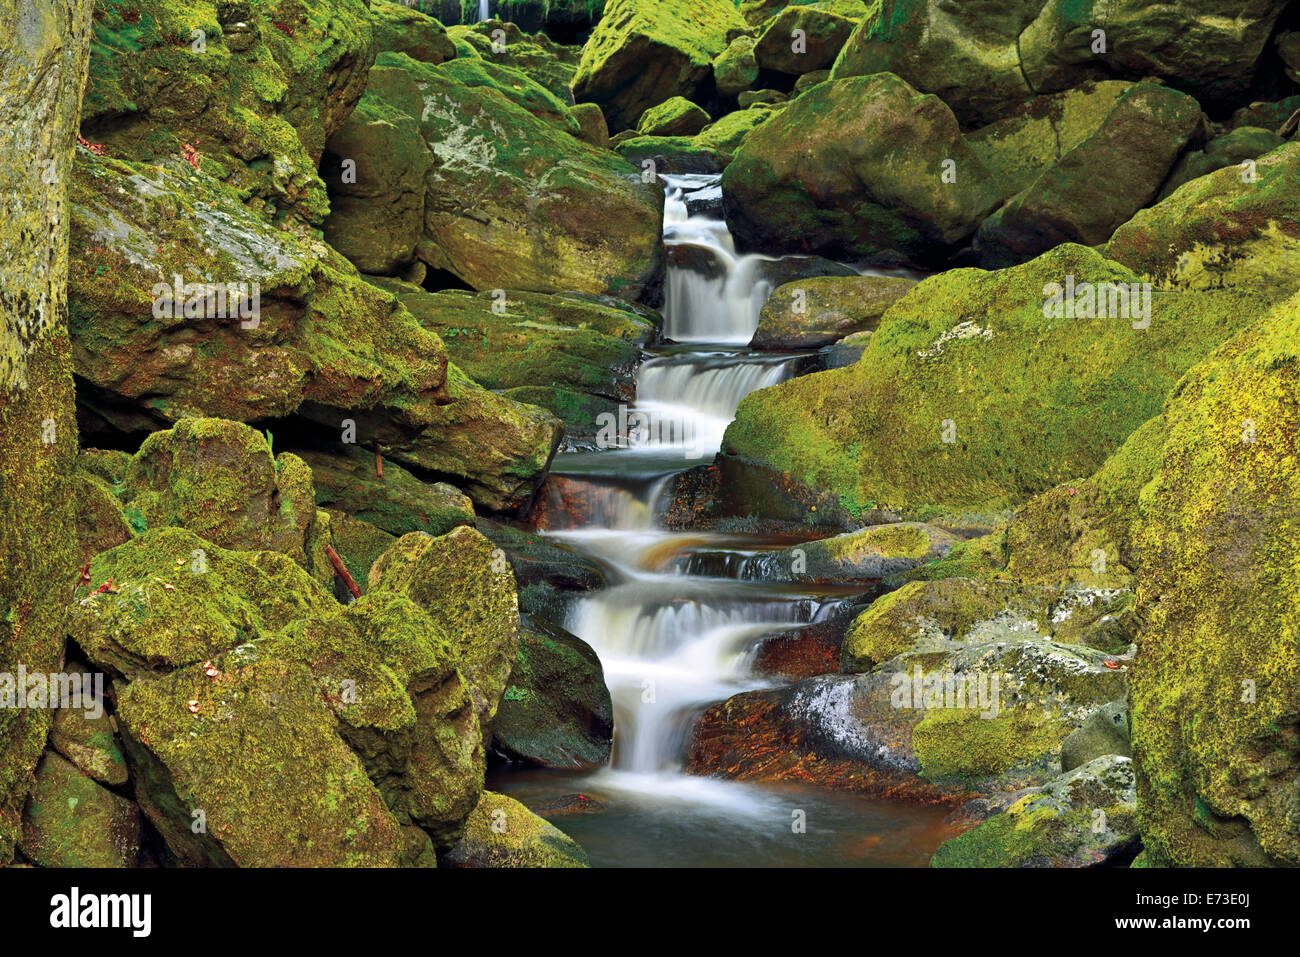 Germany, Bavaria, National Park Bavarian Forest, Nature Park Bavarian Forest, canyon, flume, water, sweet water, forest, nature, horizontal, moss covered rocks, rocks, stones, geology, Stock Photo